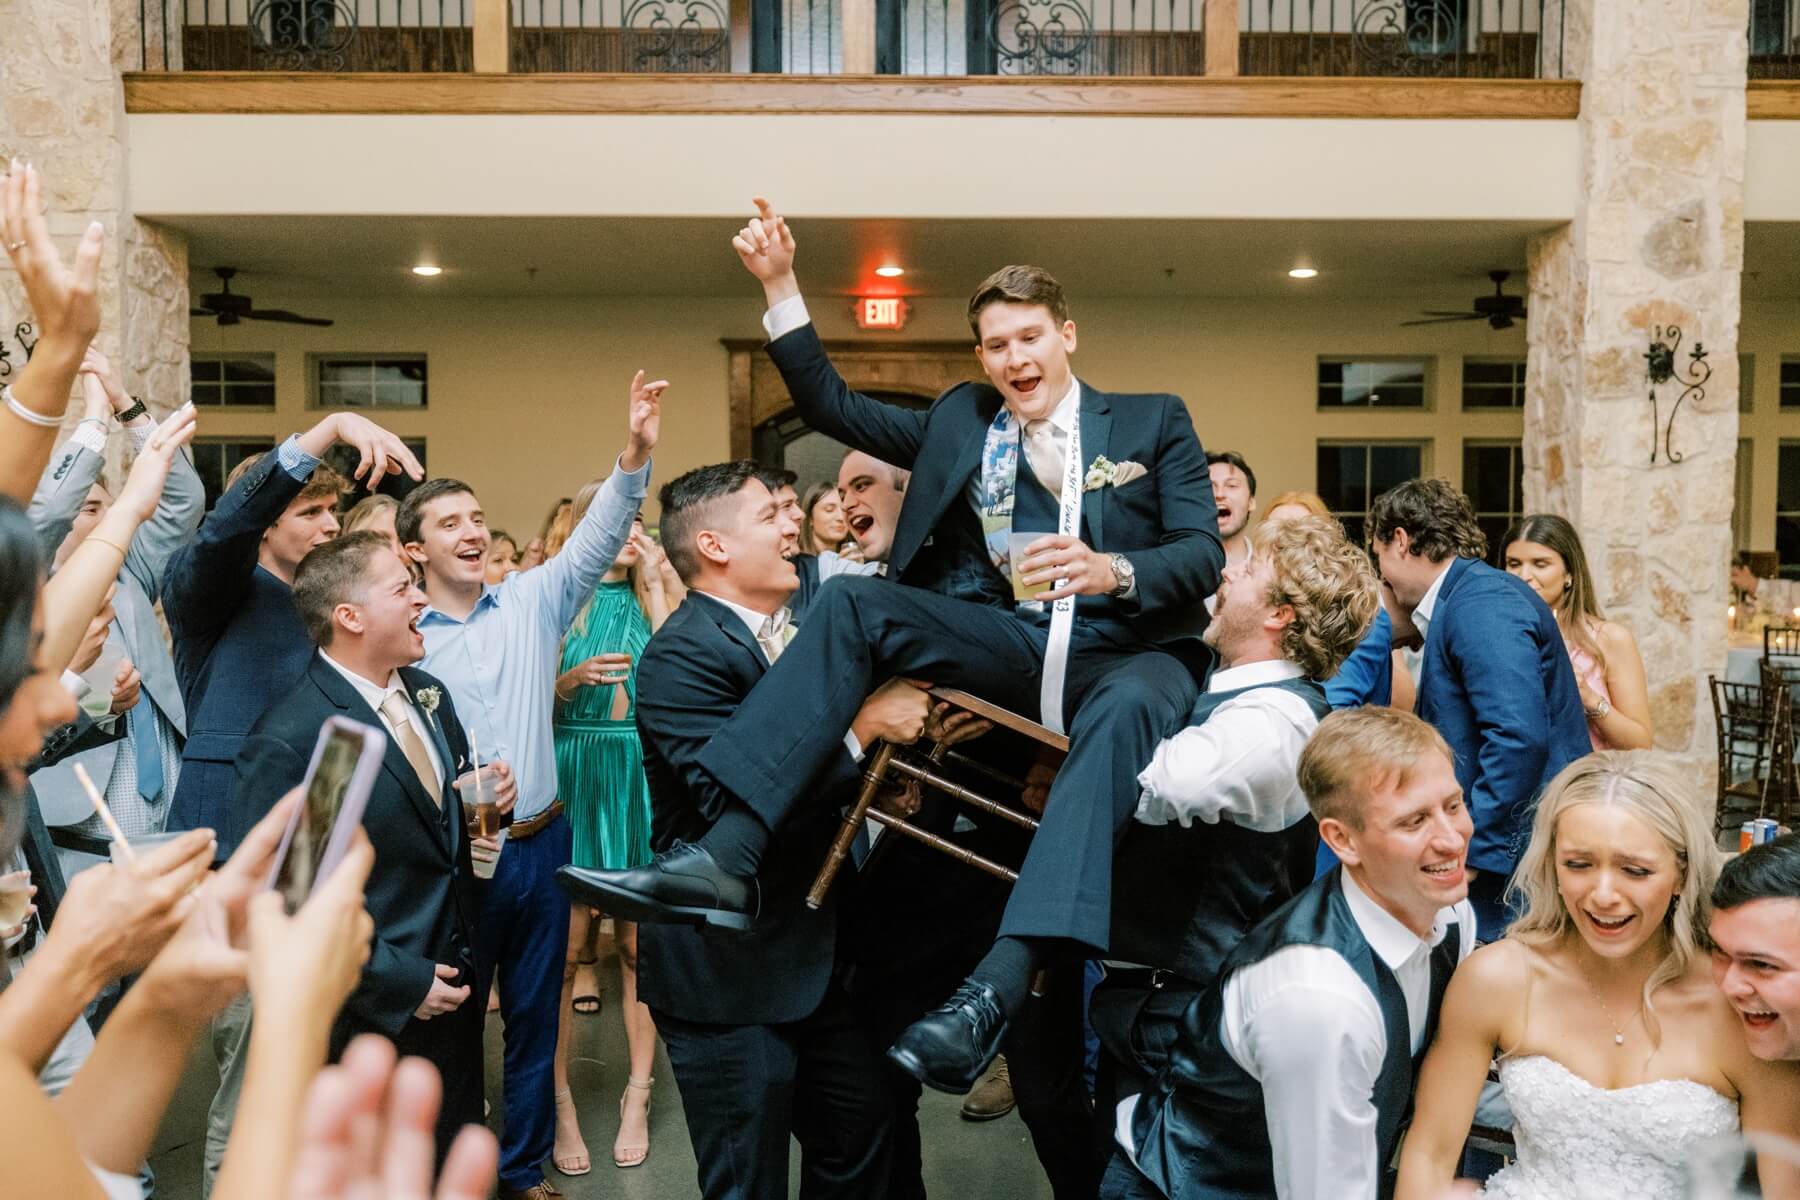 Groom being lifted on chair by groomsmen at wedding reception 